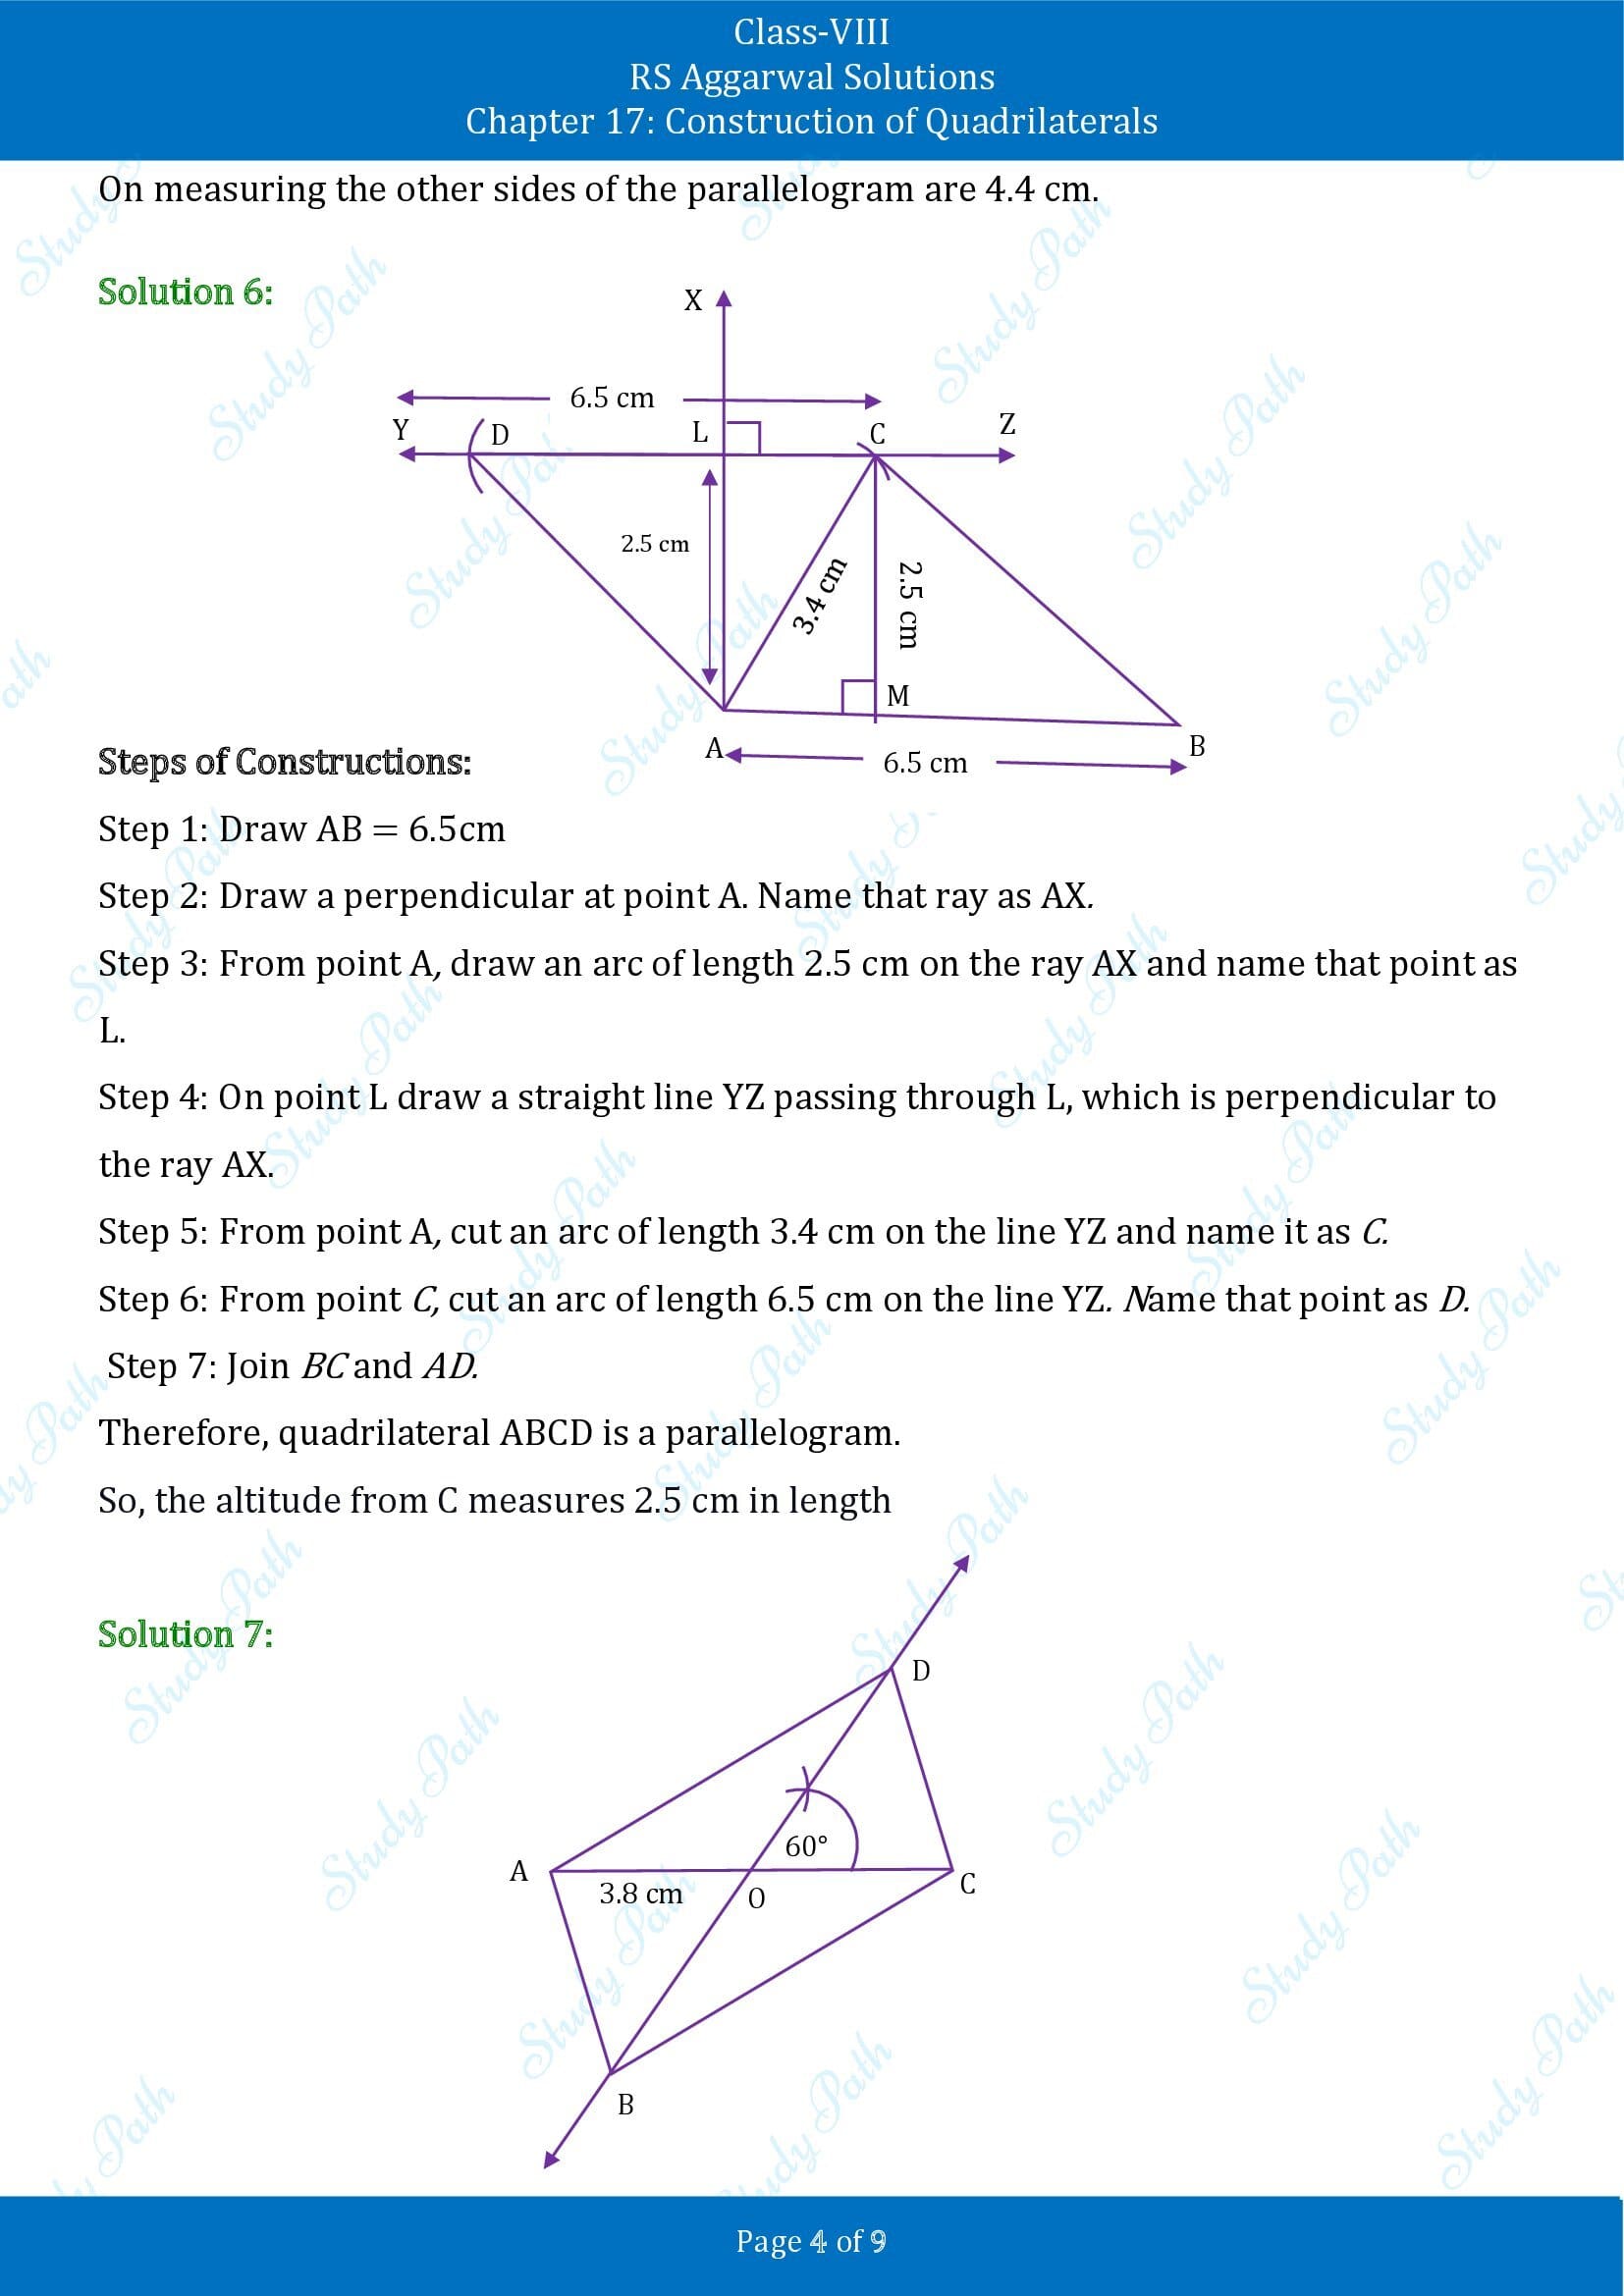 RS Aggarwal Solutions Class 8 Chapter 17 Construction of Quadrilaterals Exercise 17B 00004